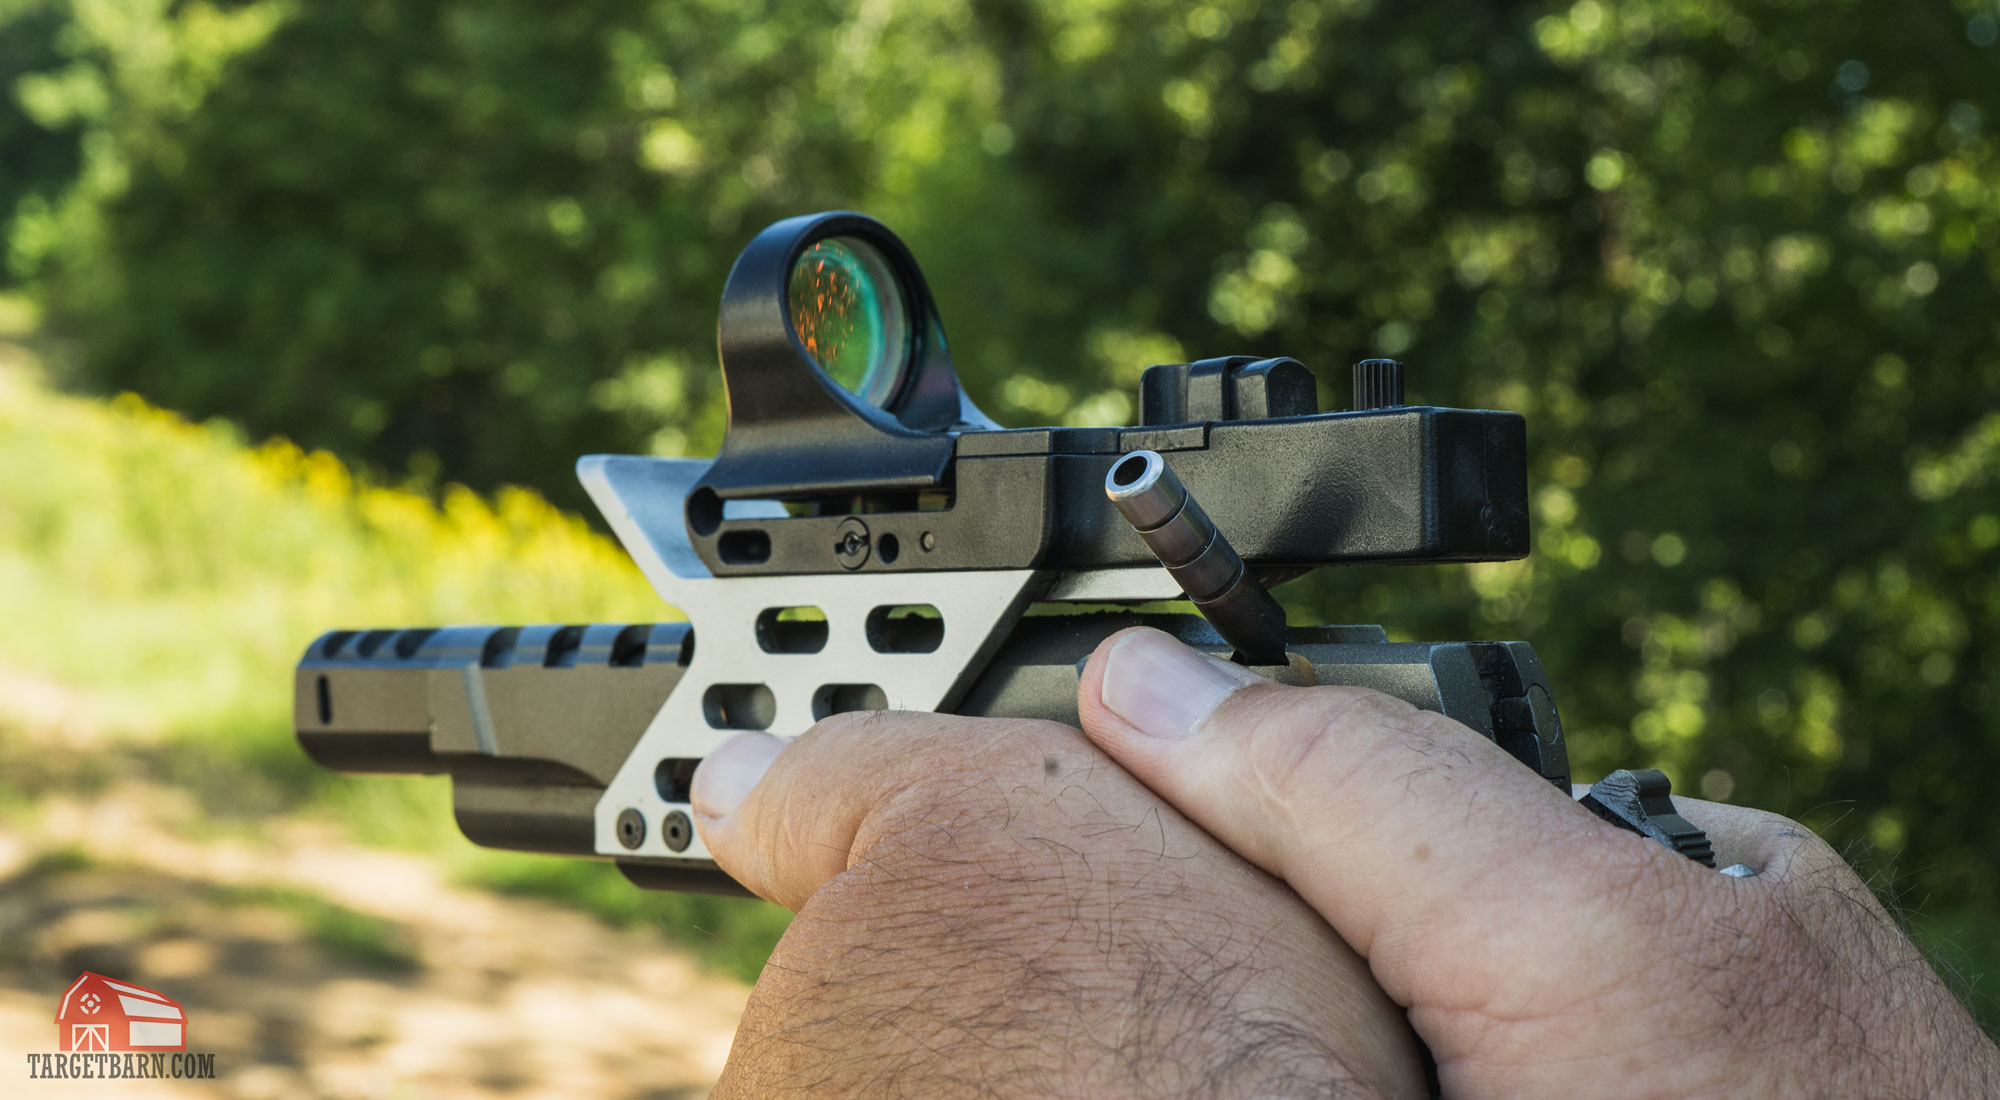 a c-more red dot sight mounted on a race gun for uspsa open